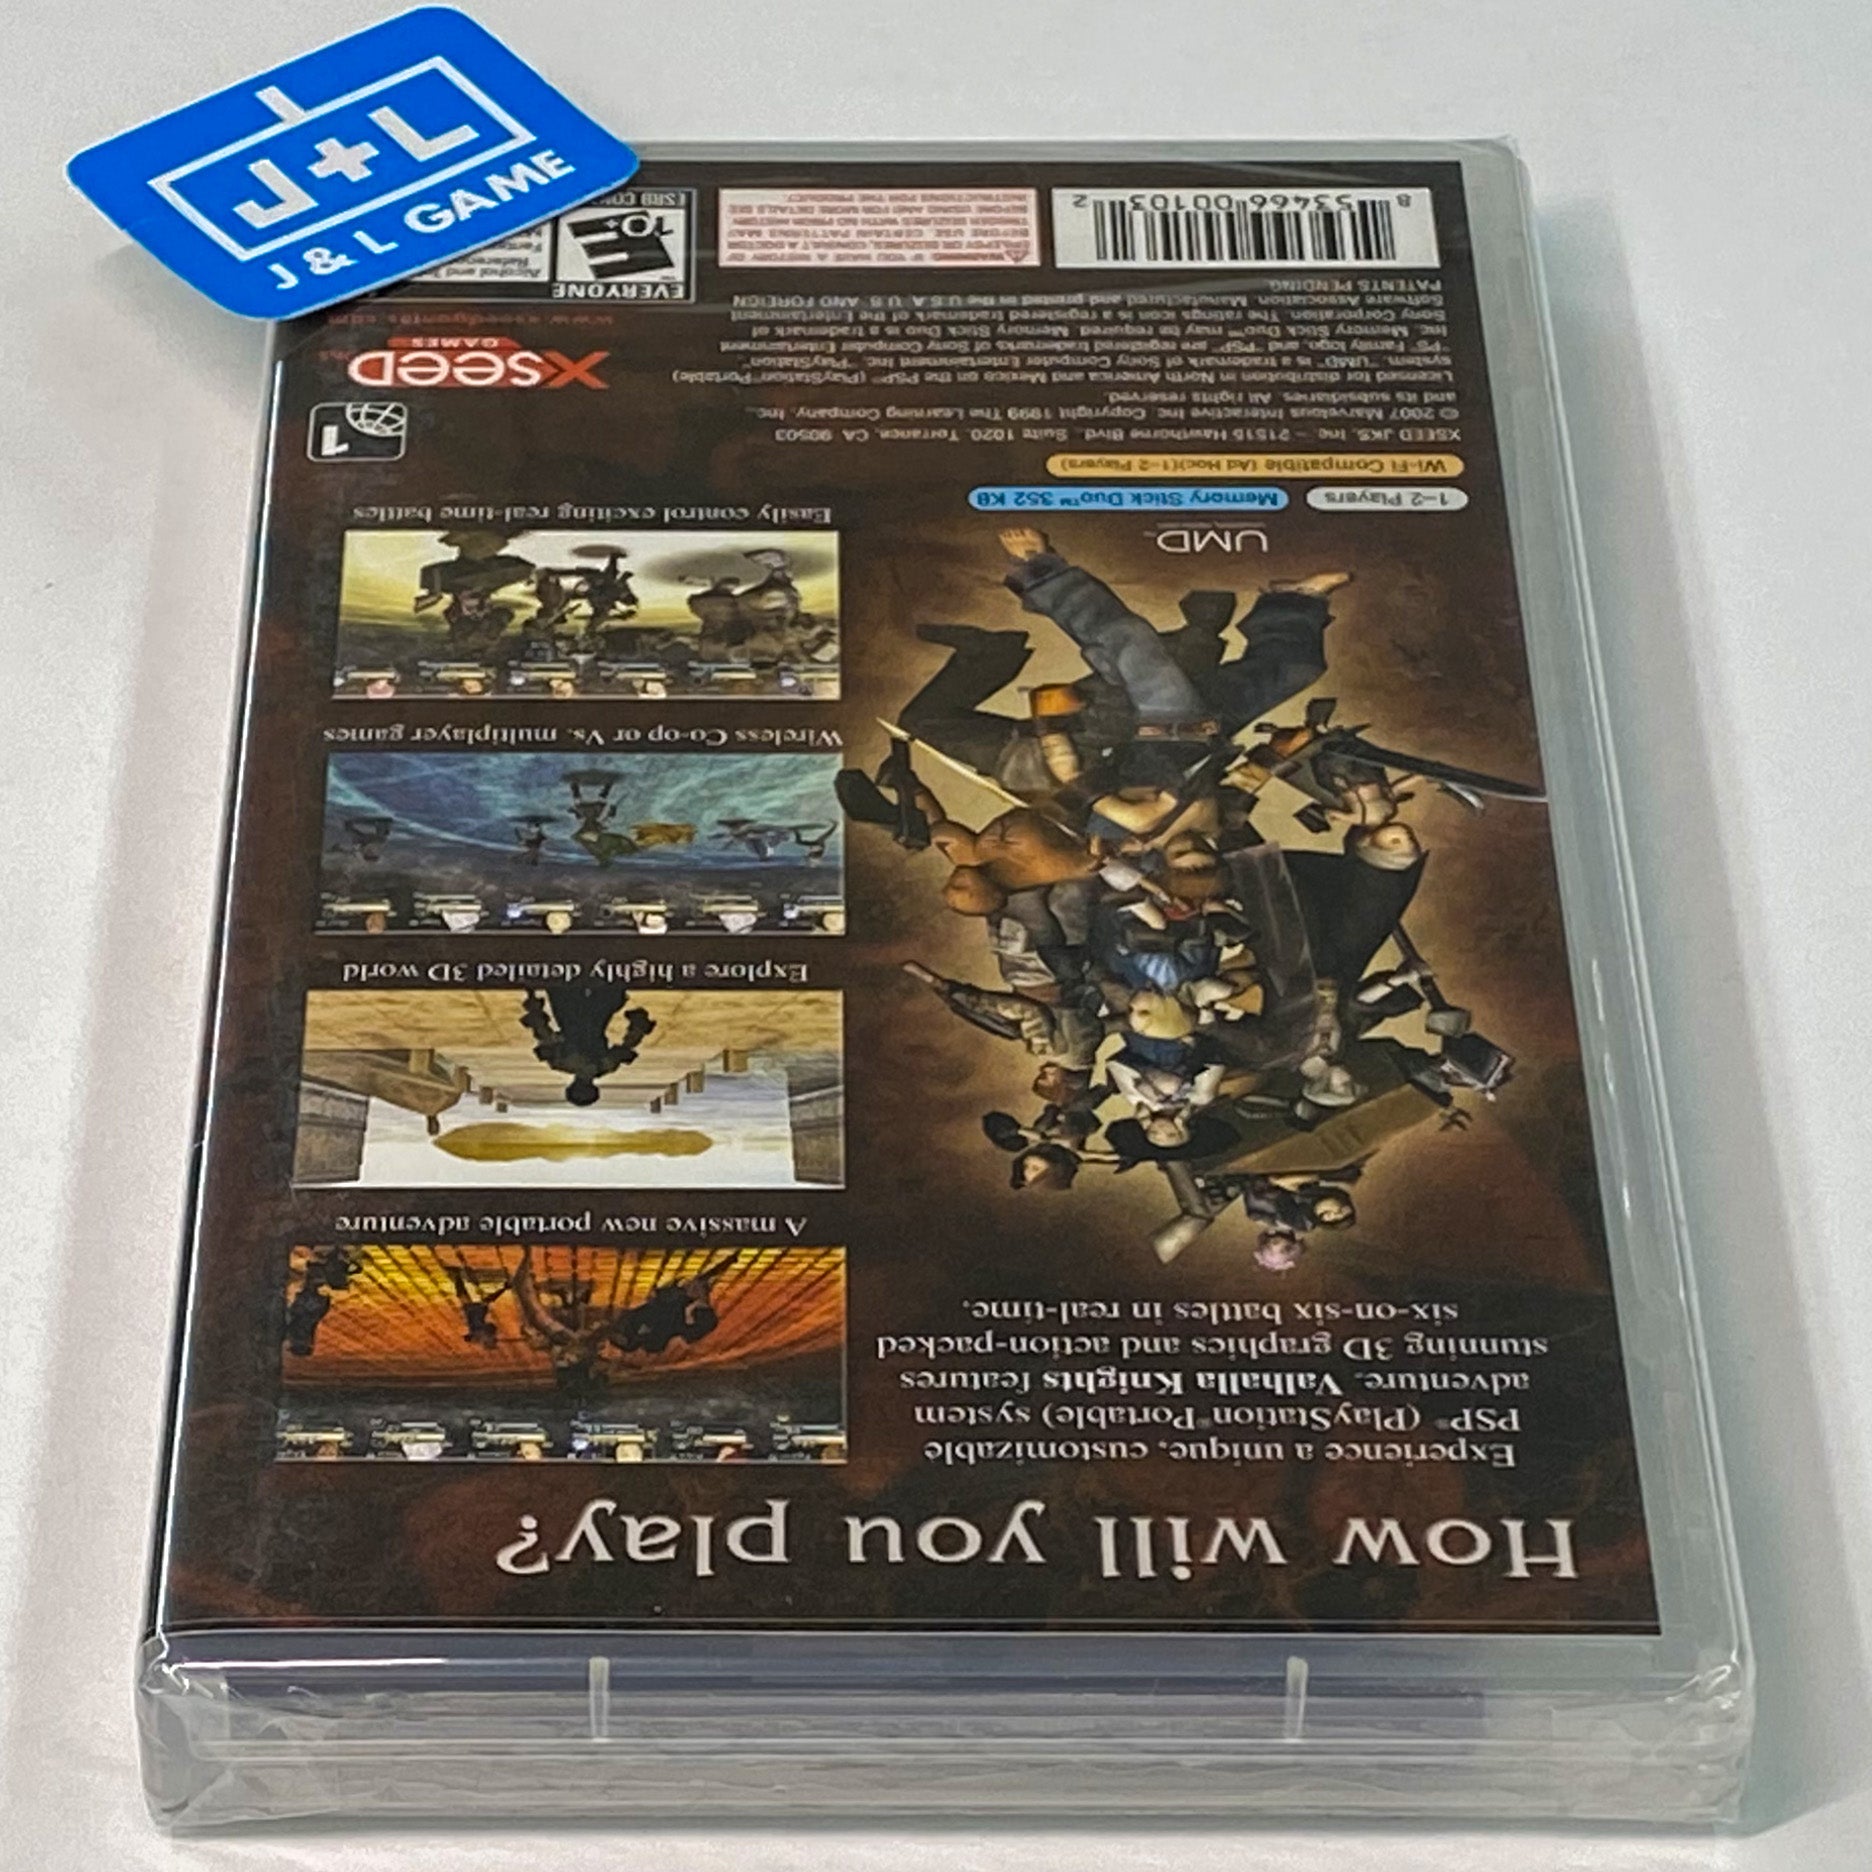 Valhalla Knights - Sony PSP Video Games Xseed Games   